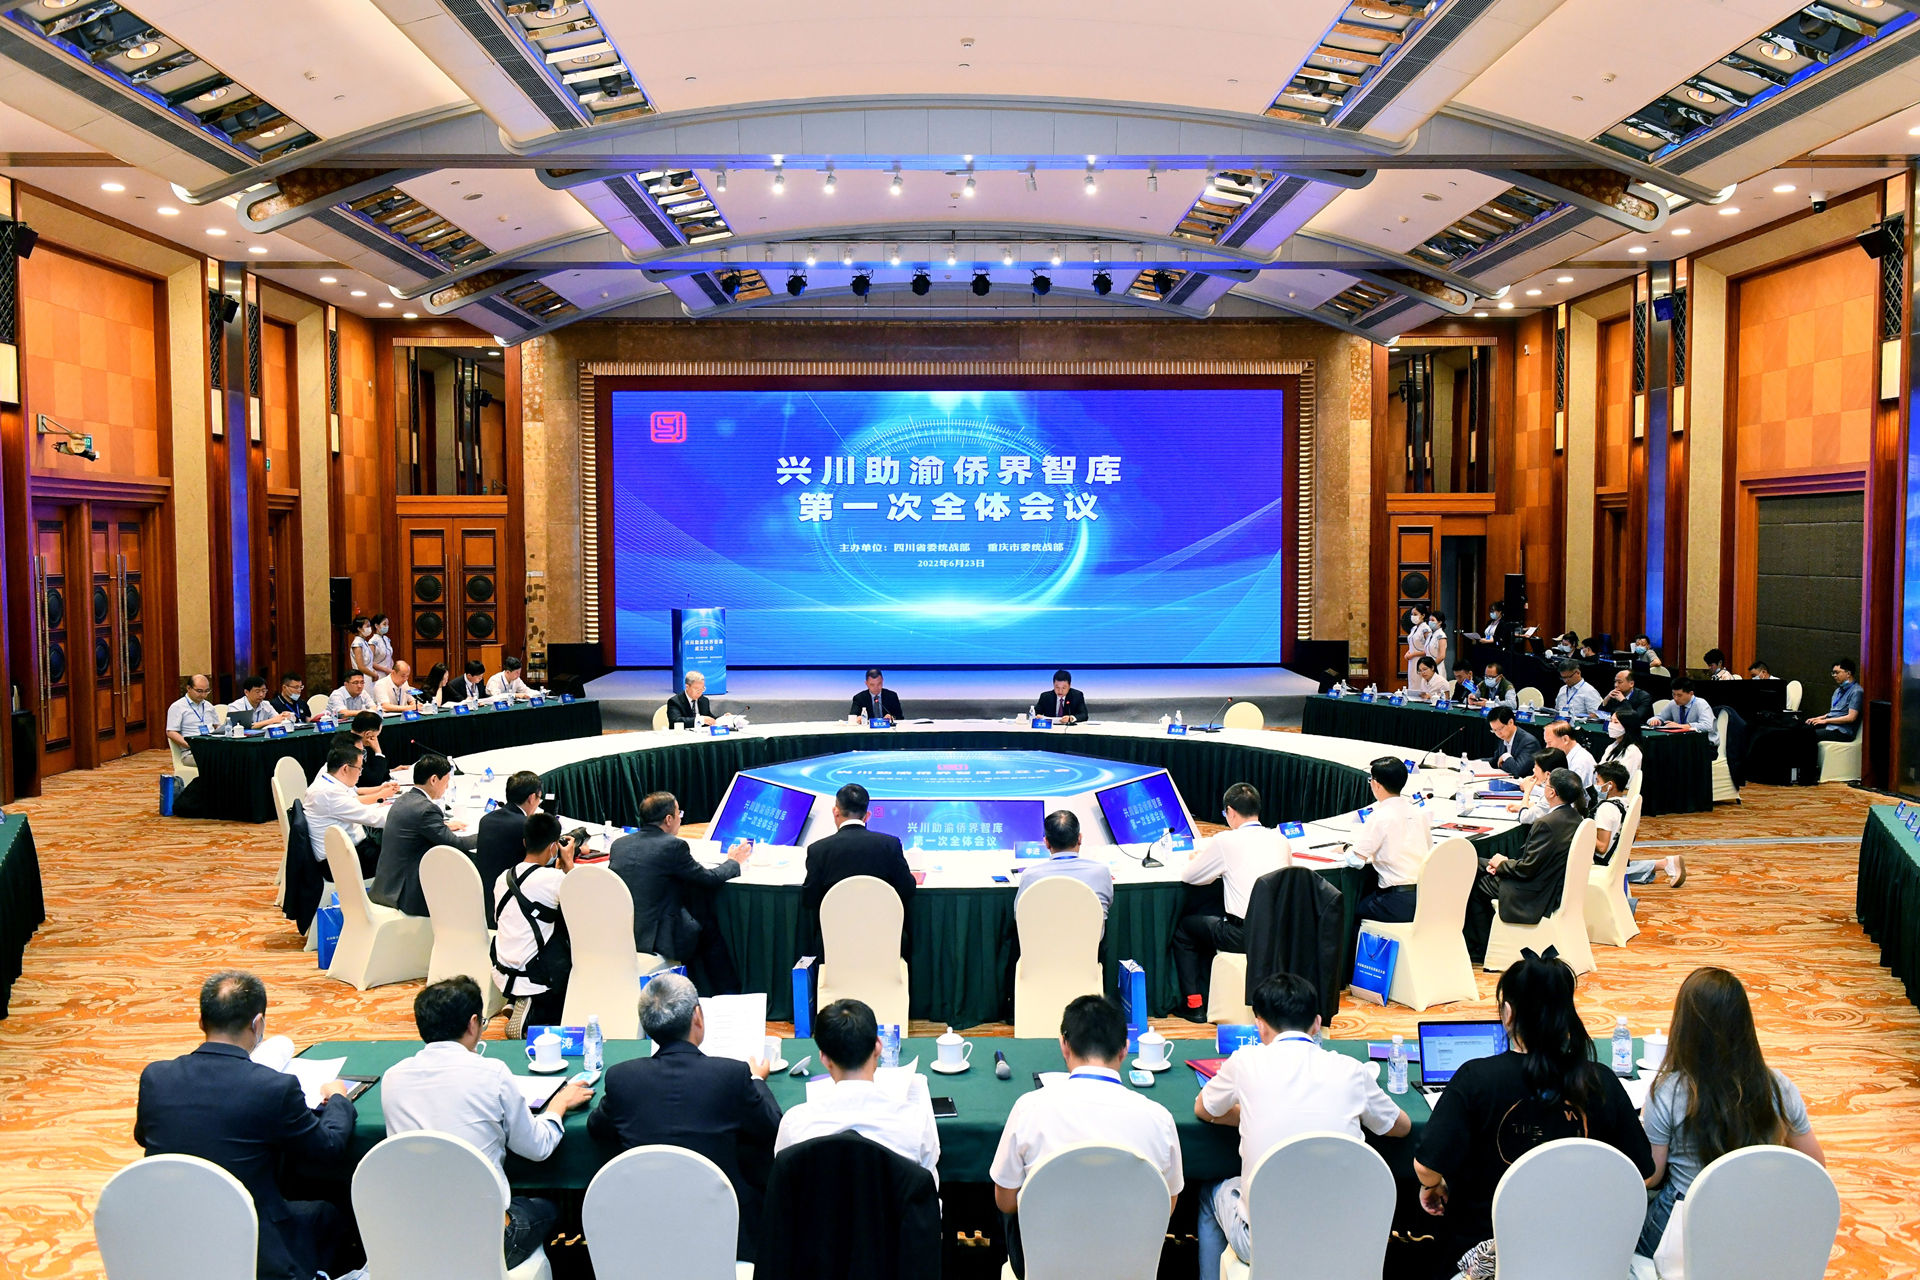 Dr. Chen Bin, President of the Group, Invited to Attend the Inaugural Meeting of “Overseas Chinese Think Tank for Flourishing Sichuan & Assisting Chongqing”